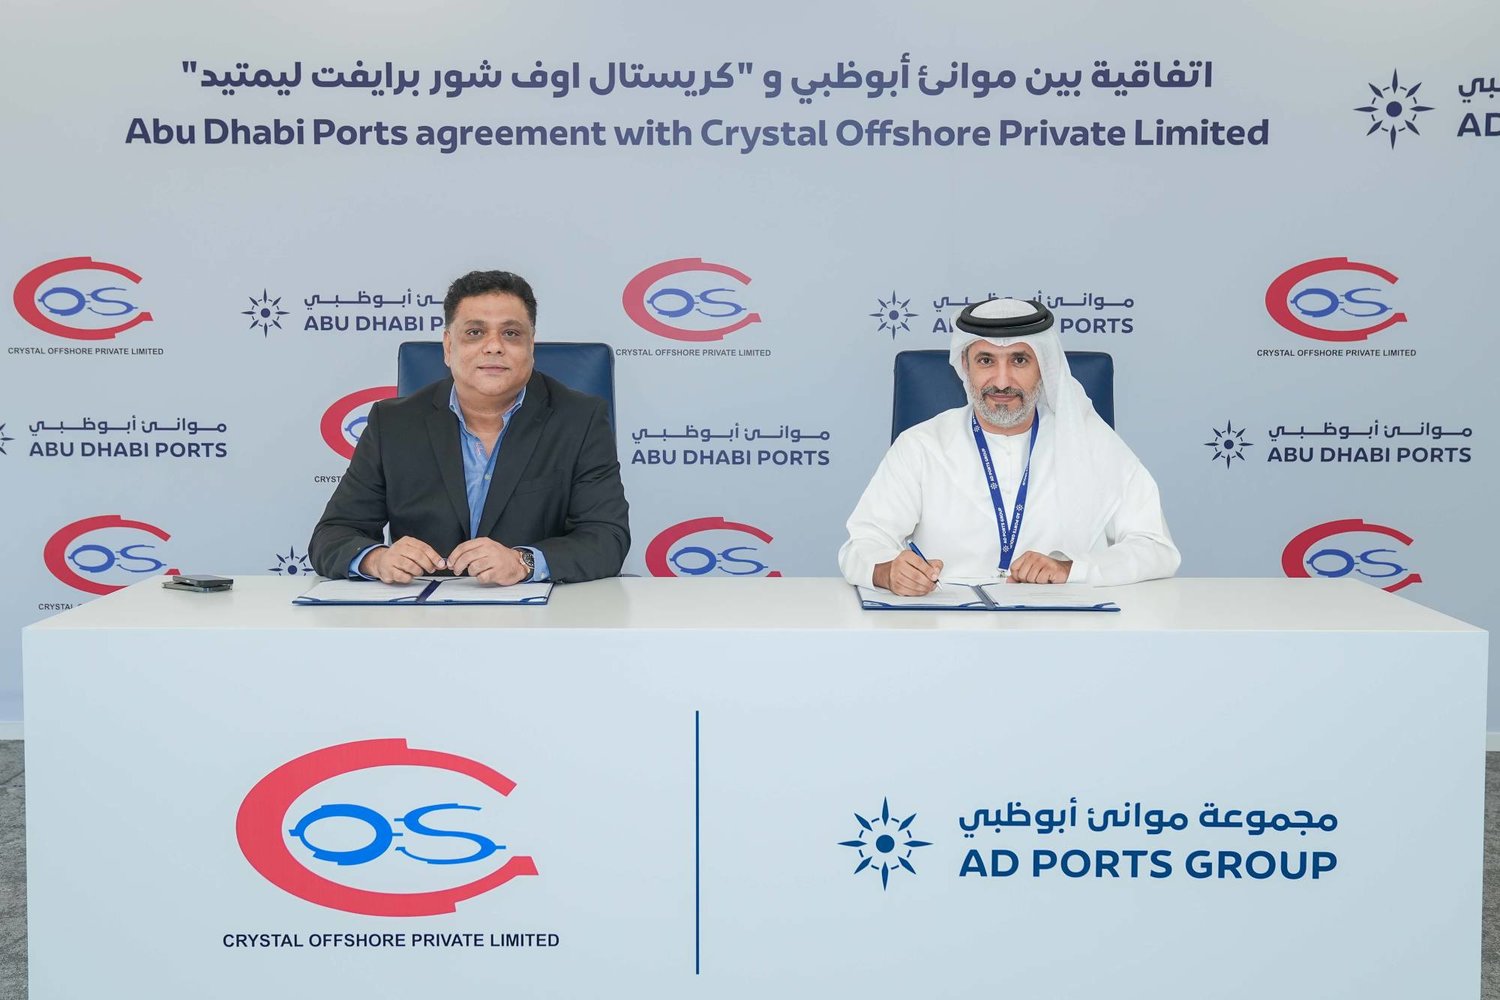 Under the agreement’s terms, a 20,000-square-meter plot of land and an associated quay wall in Khalifa Port will be allocated for Crystal Offshore to construct a base. WAM